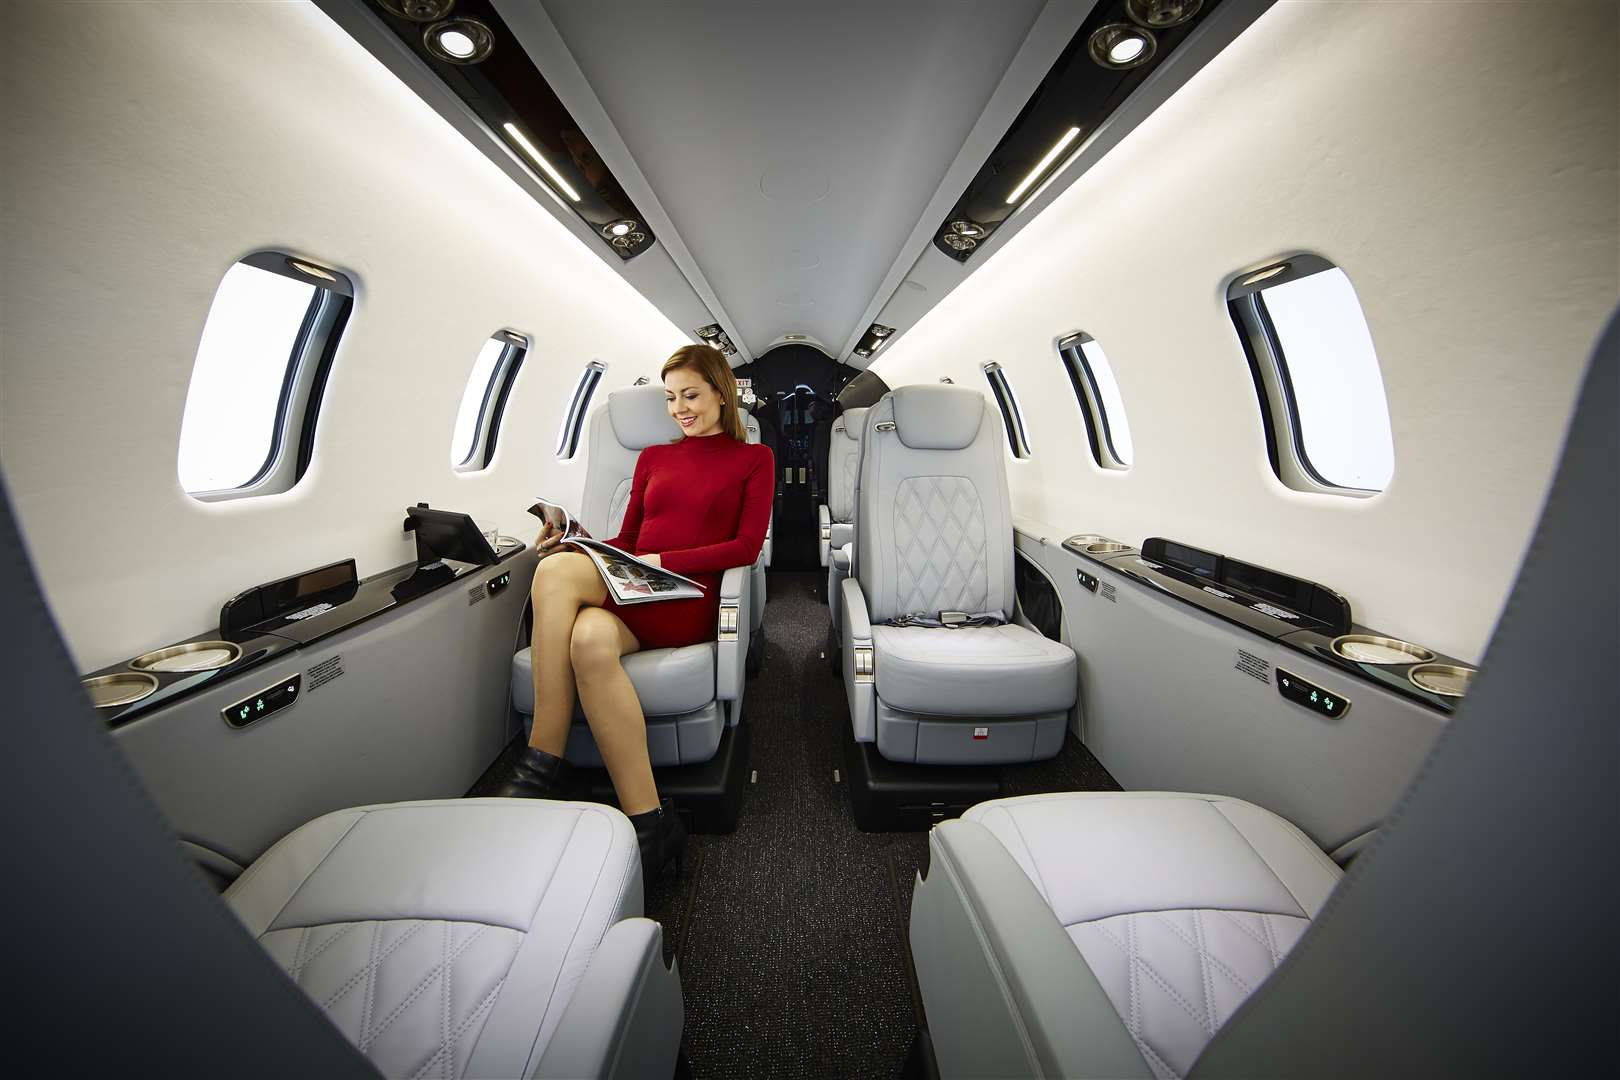 The Learjet 75 has eight seats, wifi, touch screen displays, Blu-ray DVD player and a SAT phone